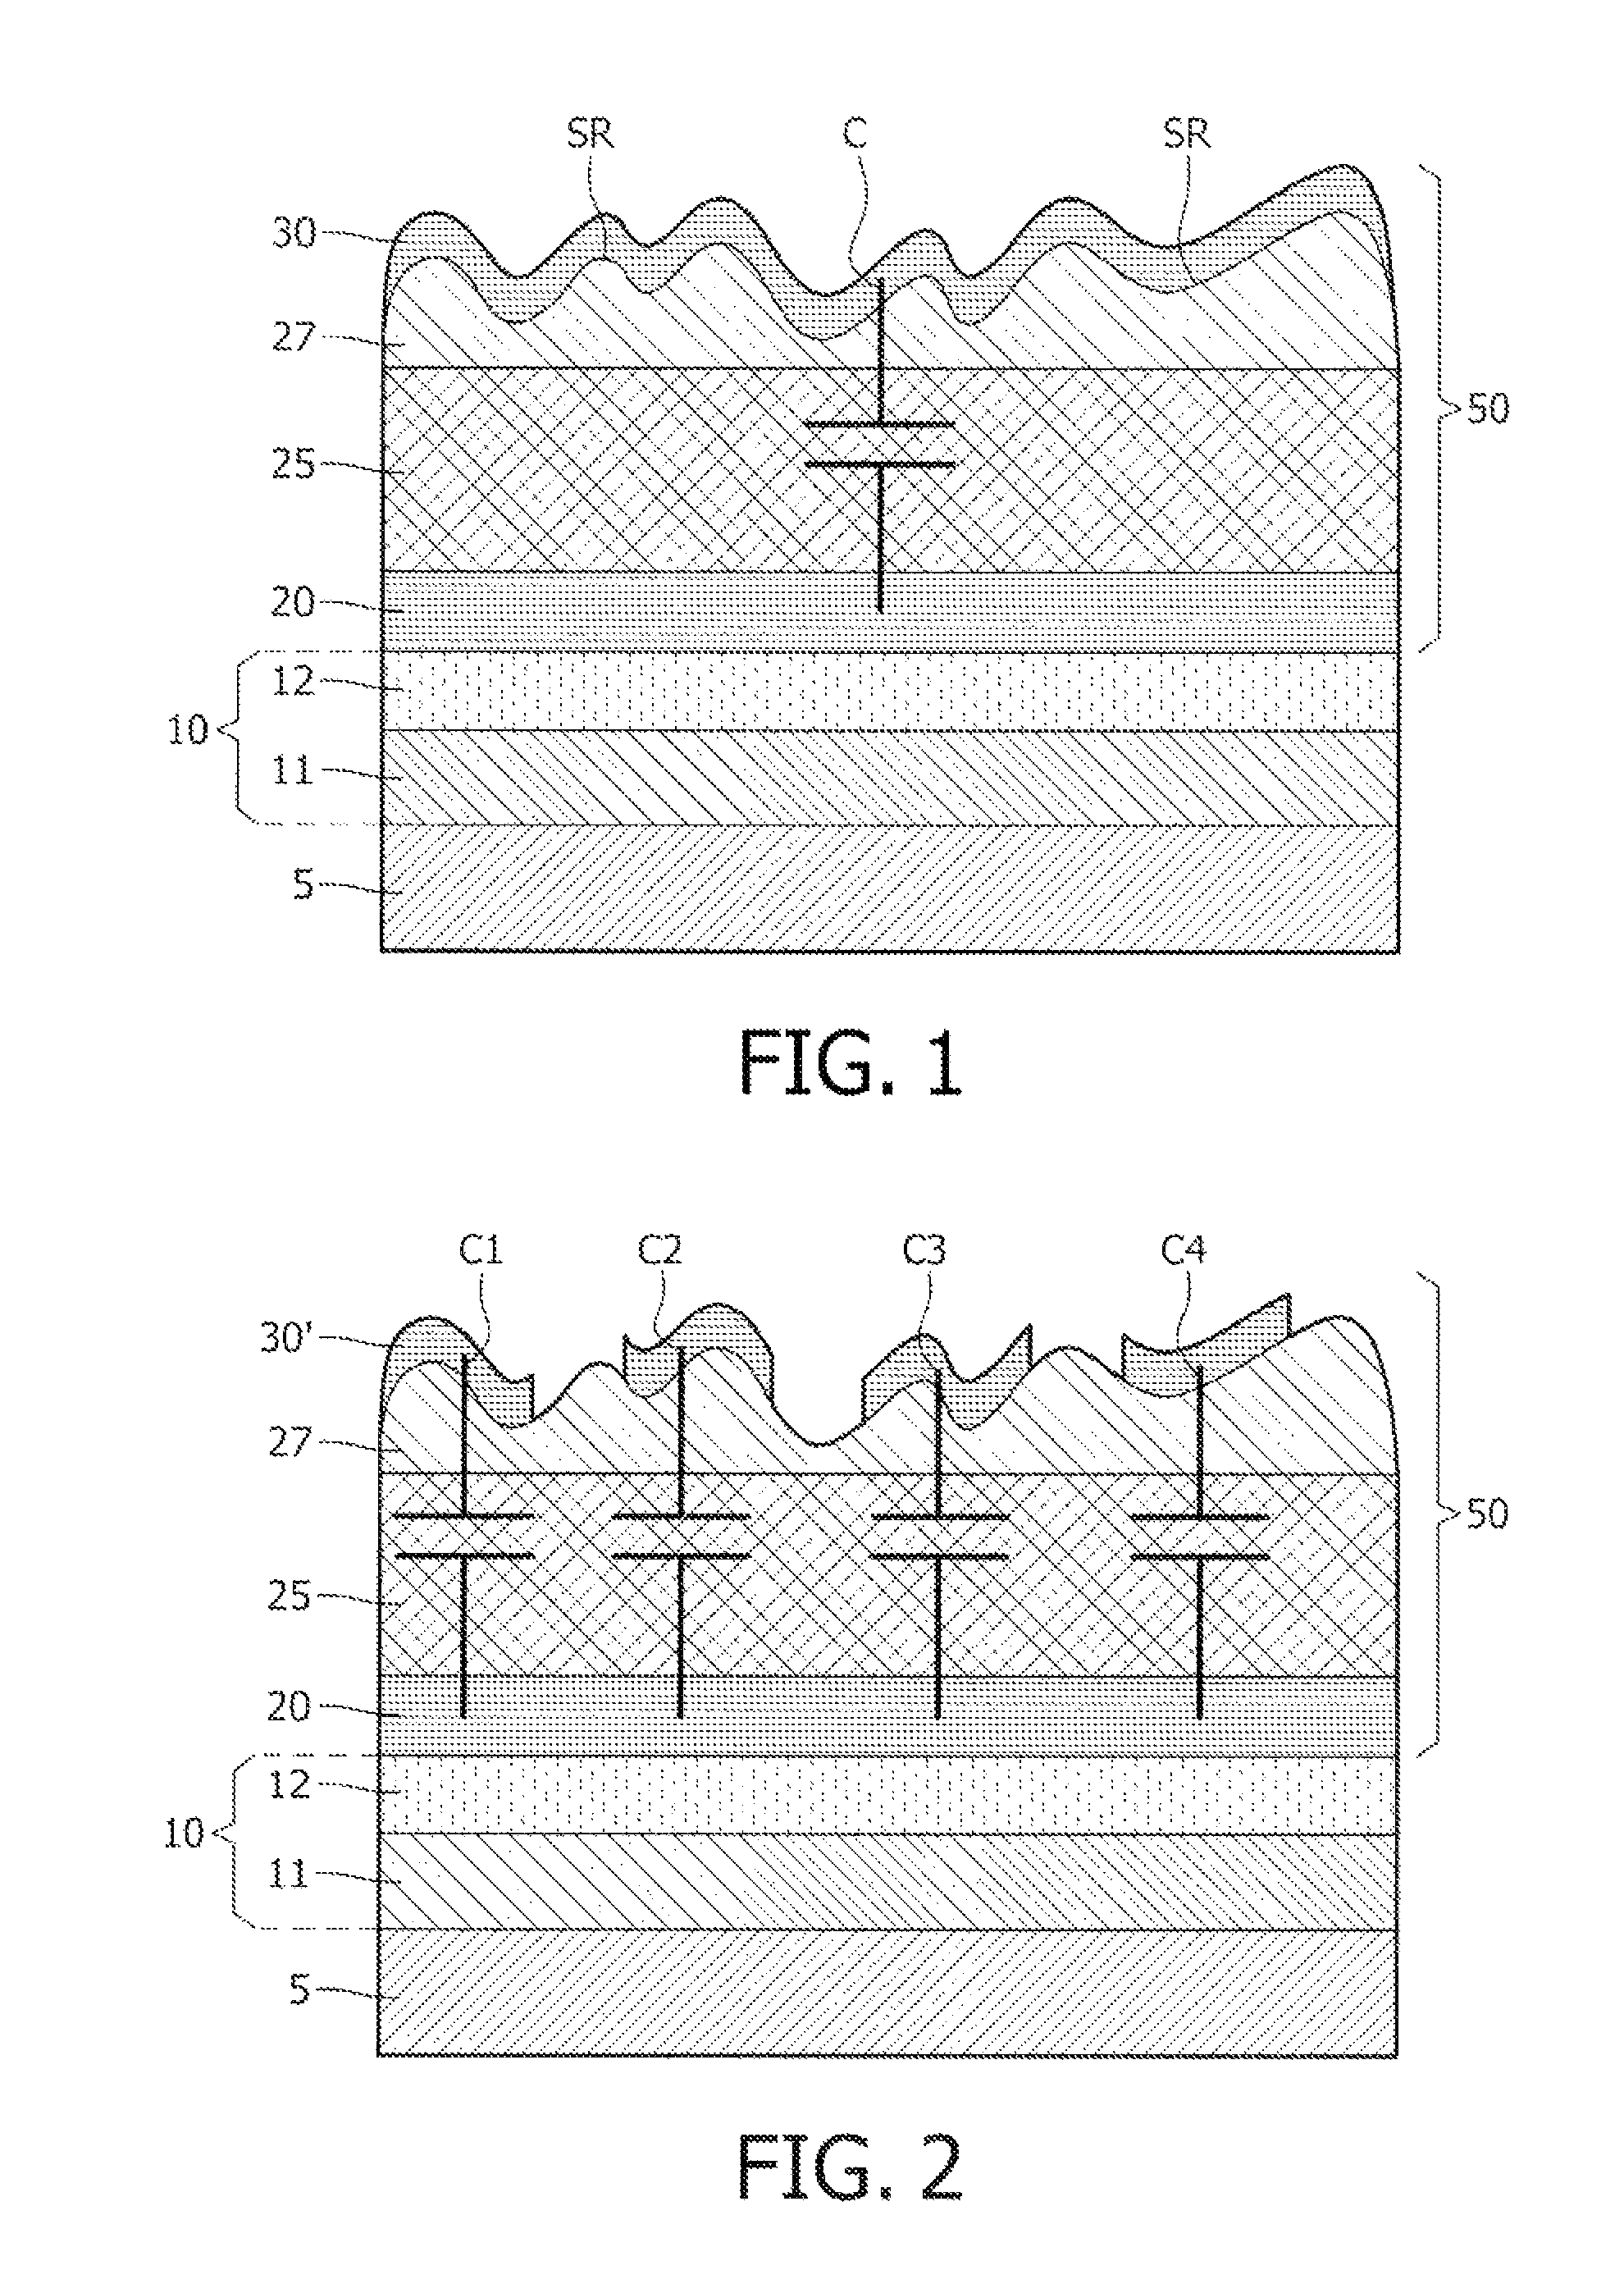 Physical structure for use in a physical unclonable function